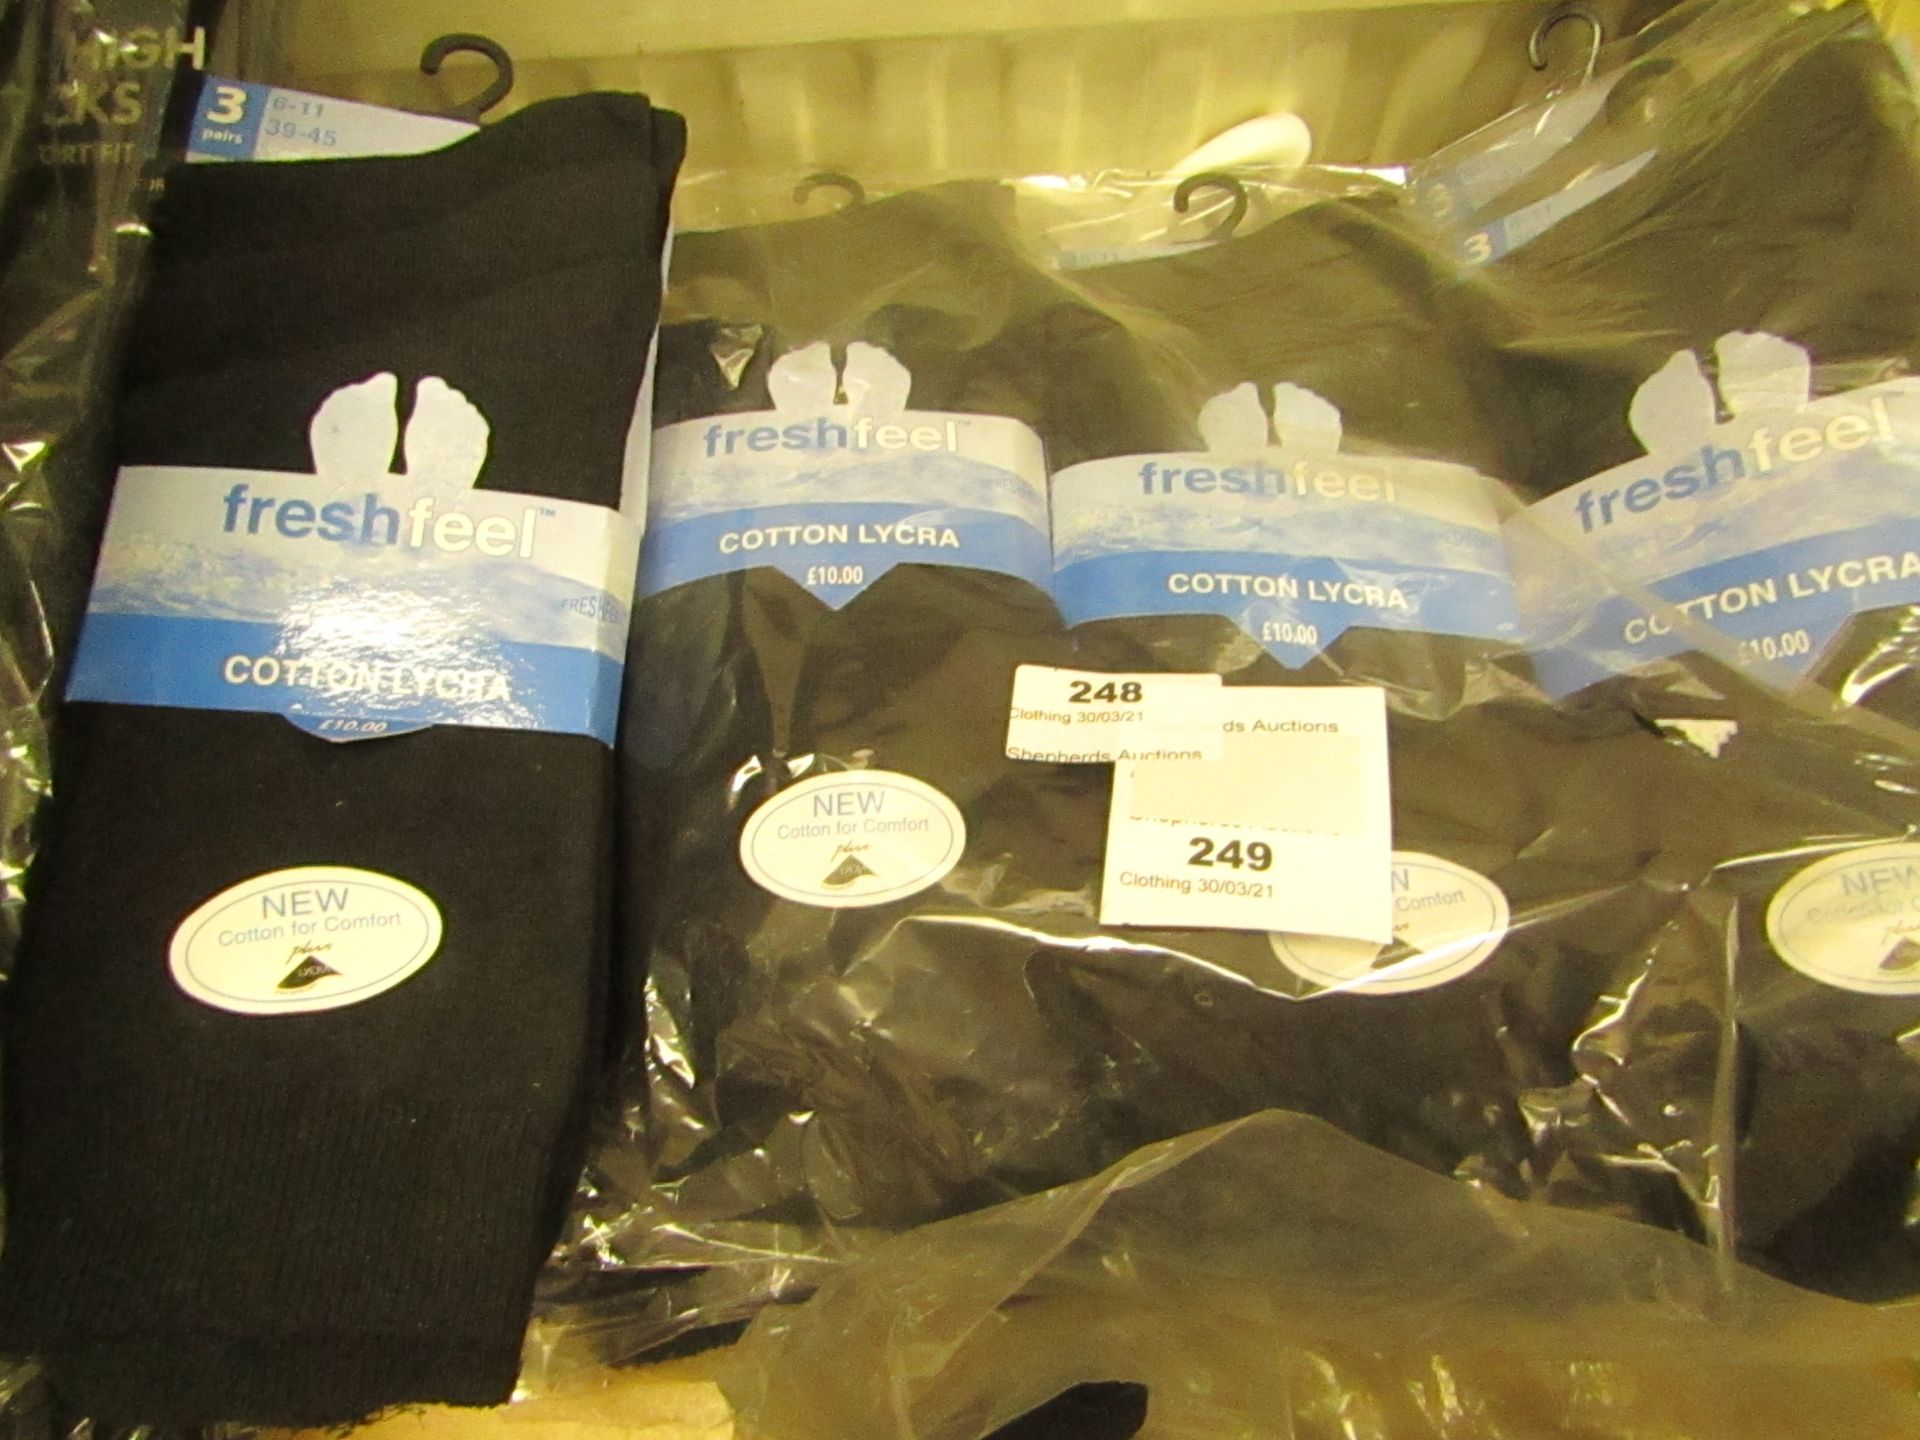 12 X Pairs of Mens Cotton Lycra Black Socks Size 6 to 11 New & Packaged